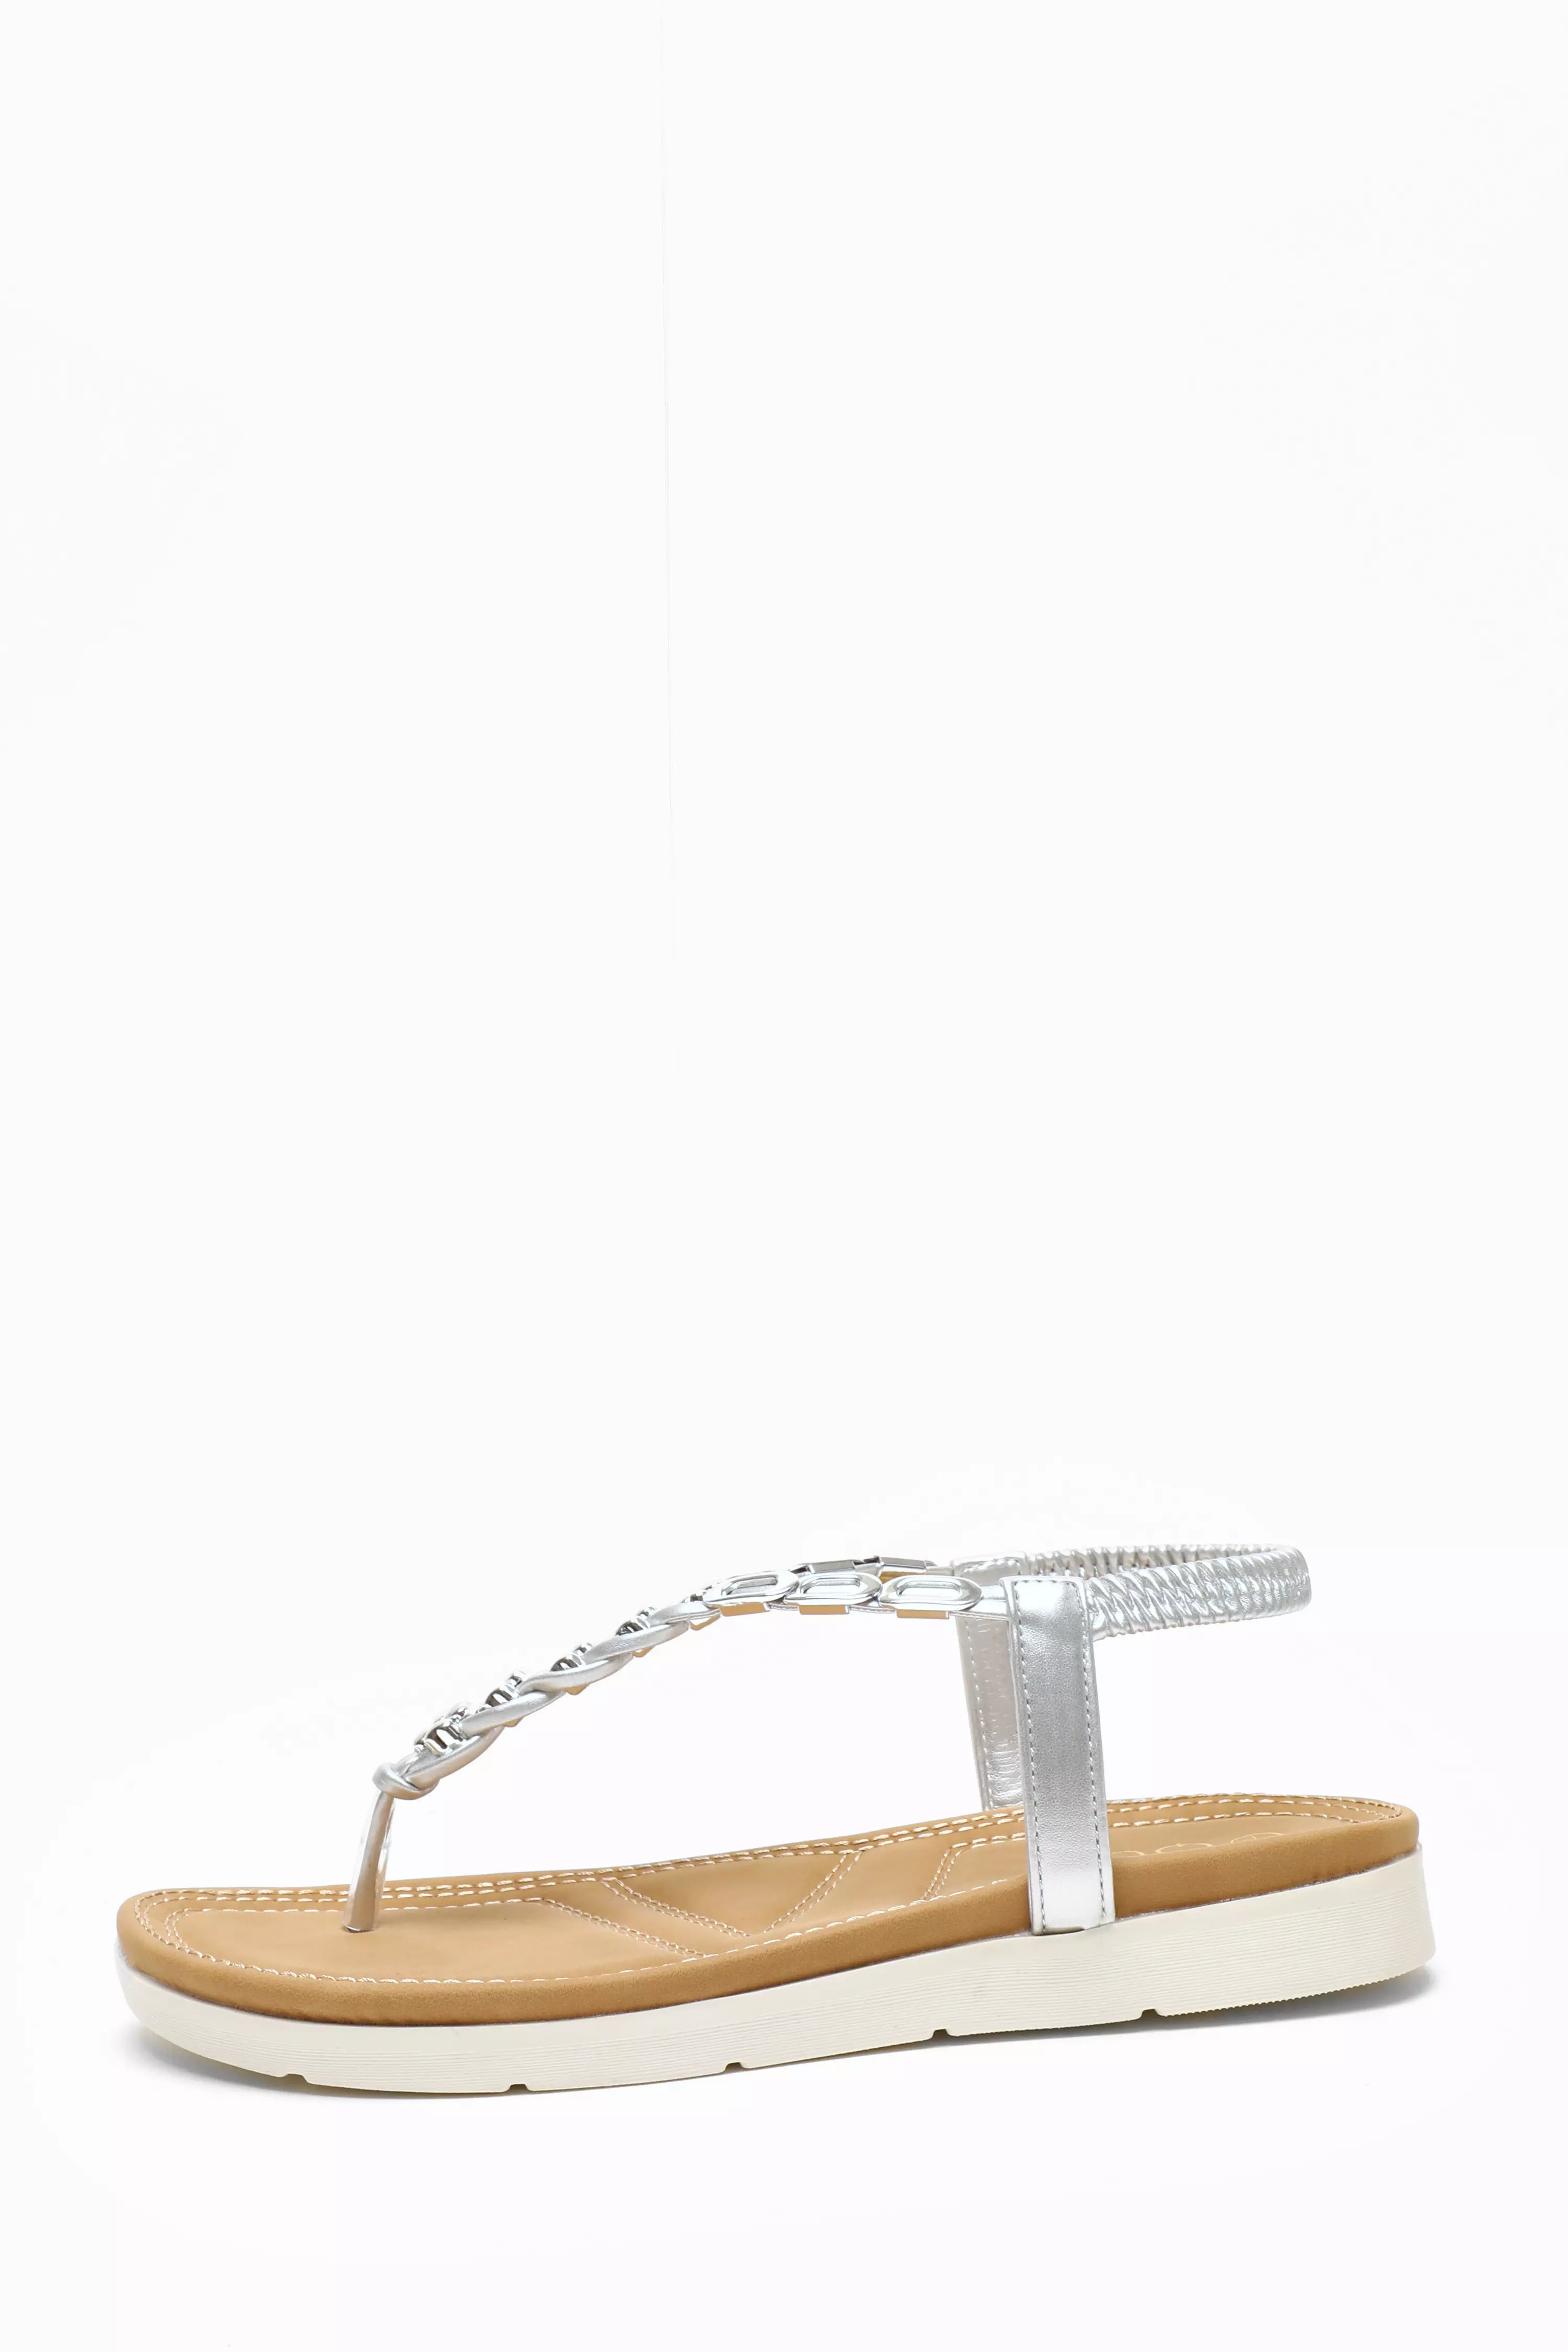 Silver Pleated Comfort Flat Sandals